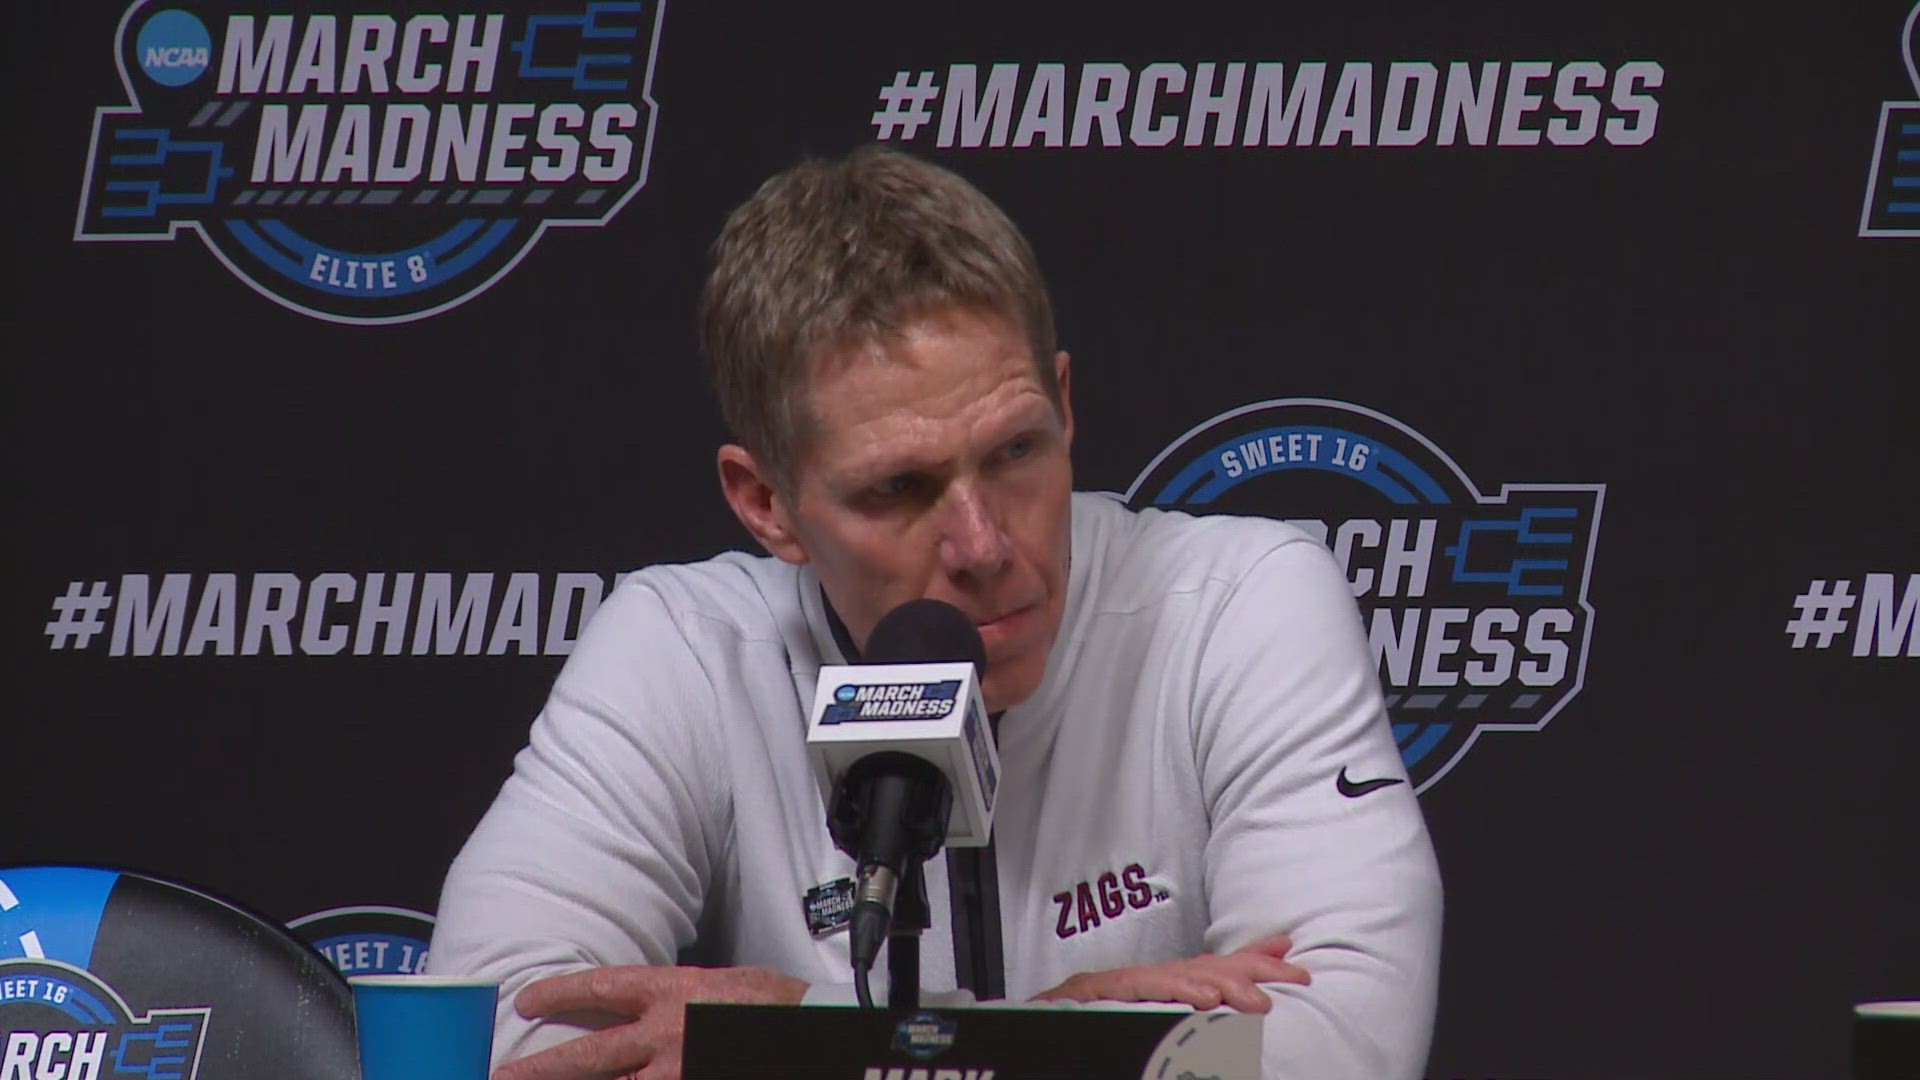 Gonzaga players and Mark Few discuss loss to Purdue in Sweet 16 of NCAA Tournament 80 - 68.